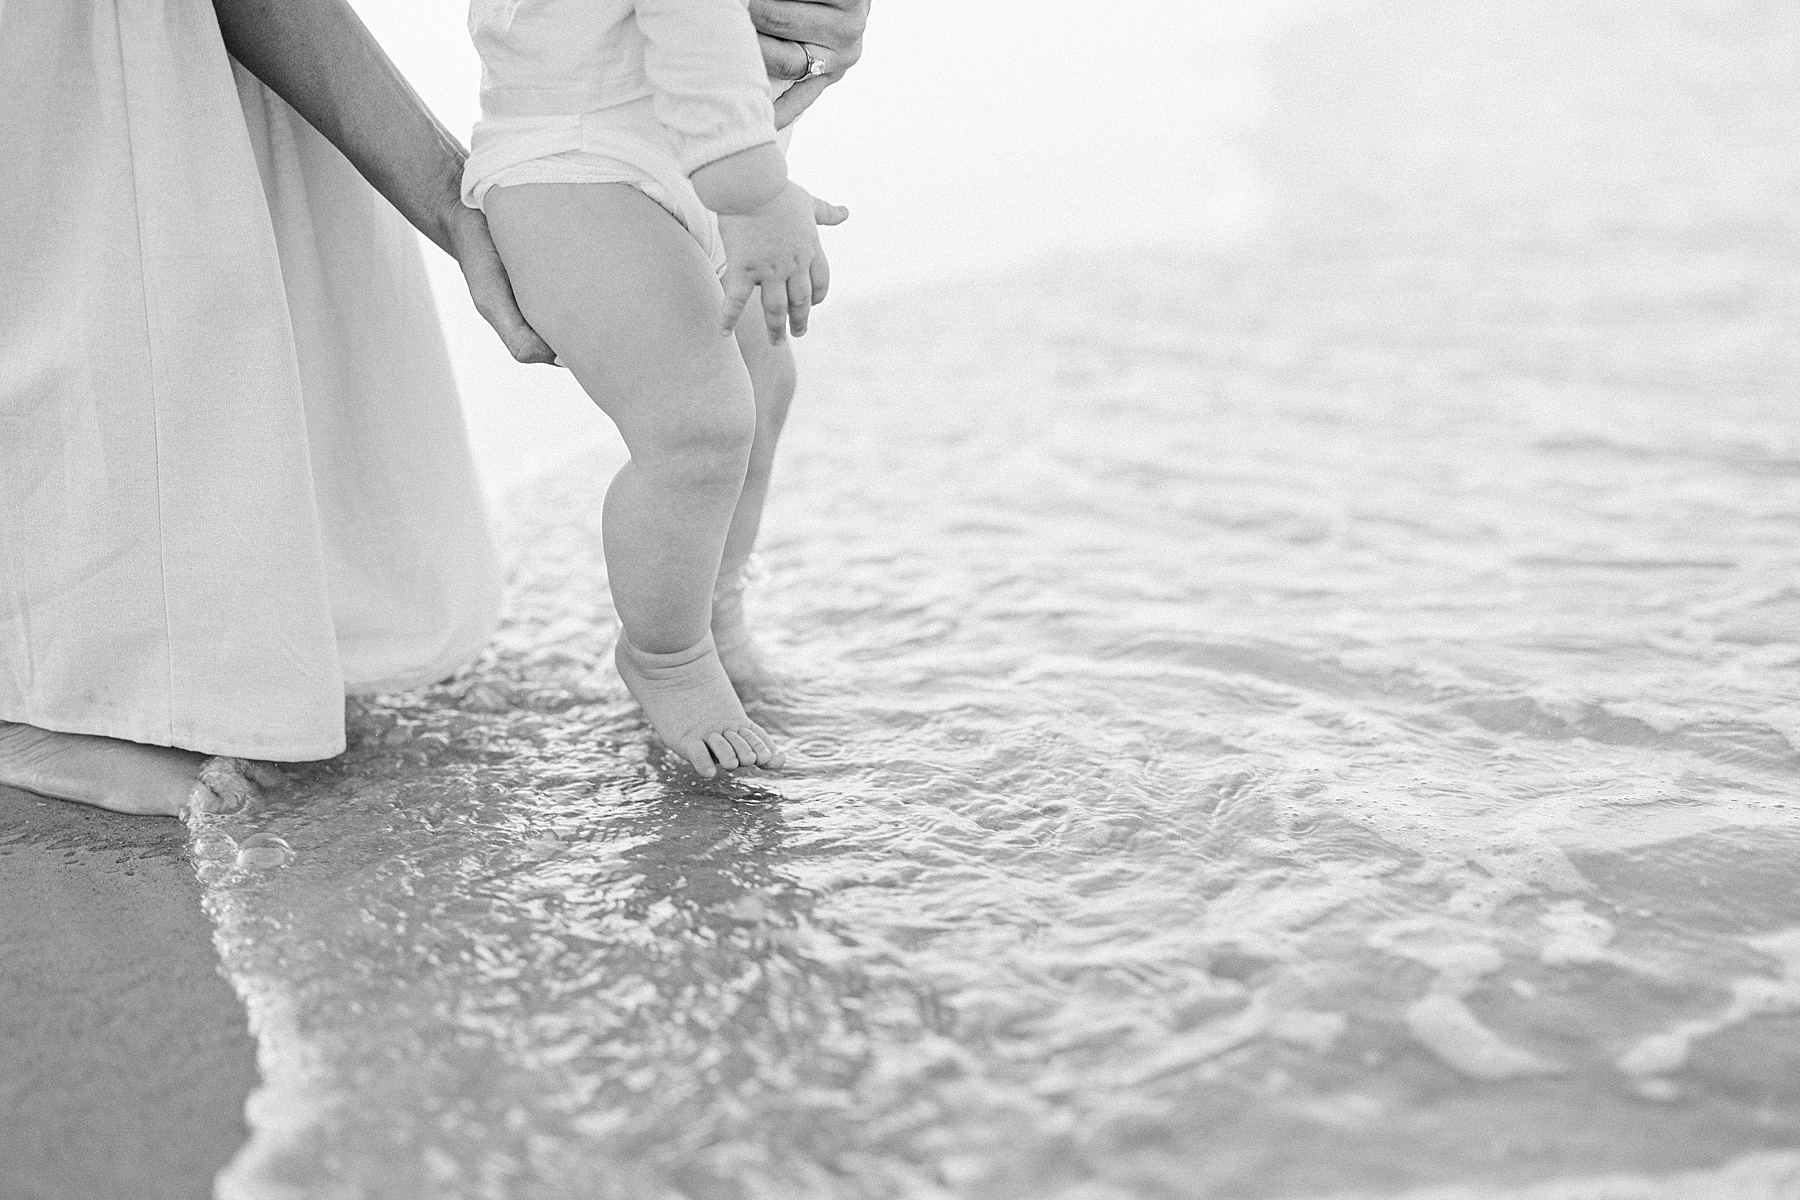 baby toes in the water in black and white image